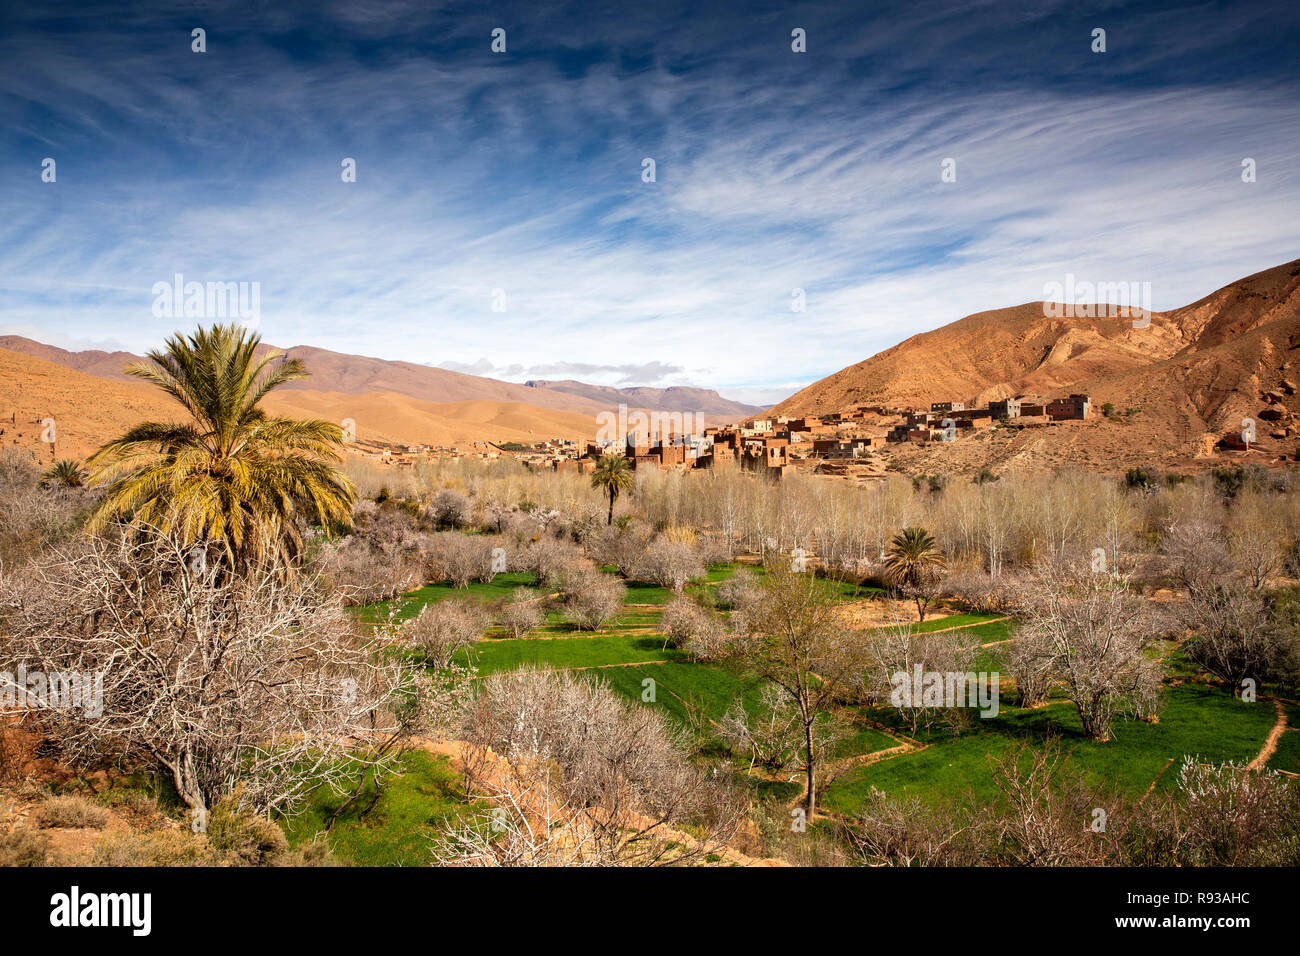 Morocco, Dades Gorge, Ait Ouglif village irrigated agricultural fields around historic settlement Stock Photo